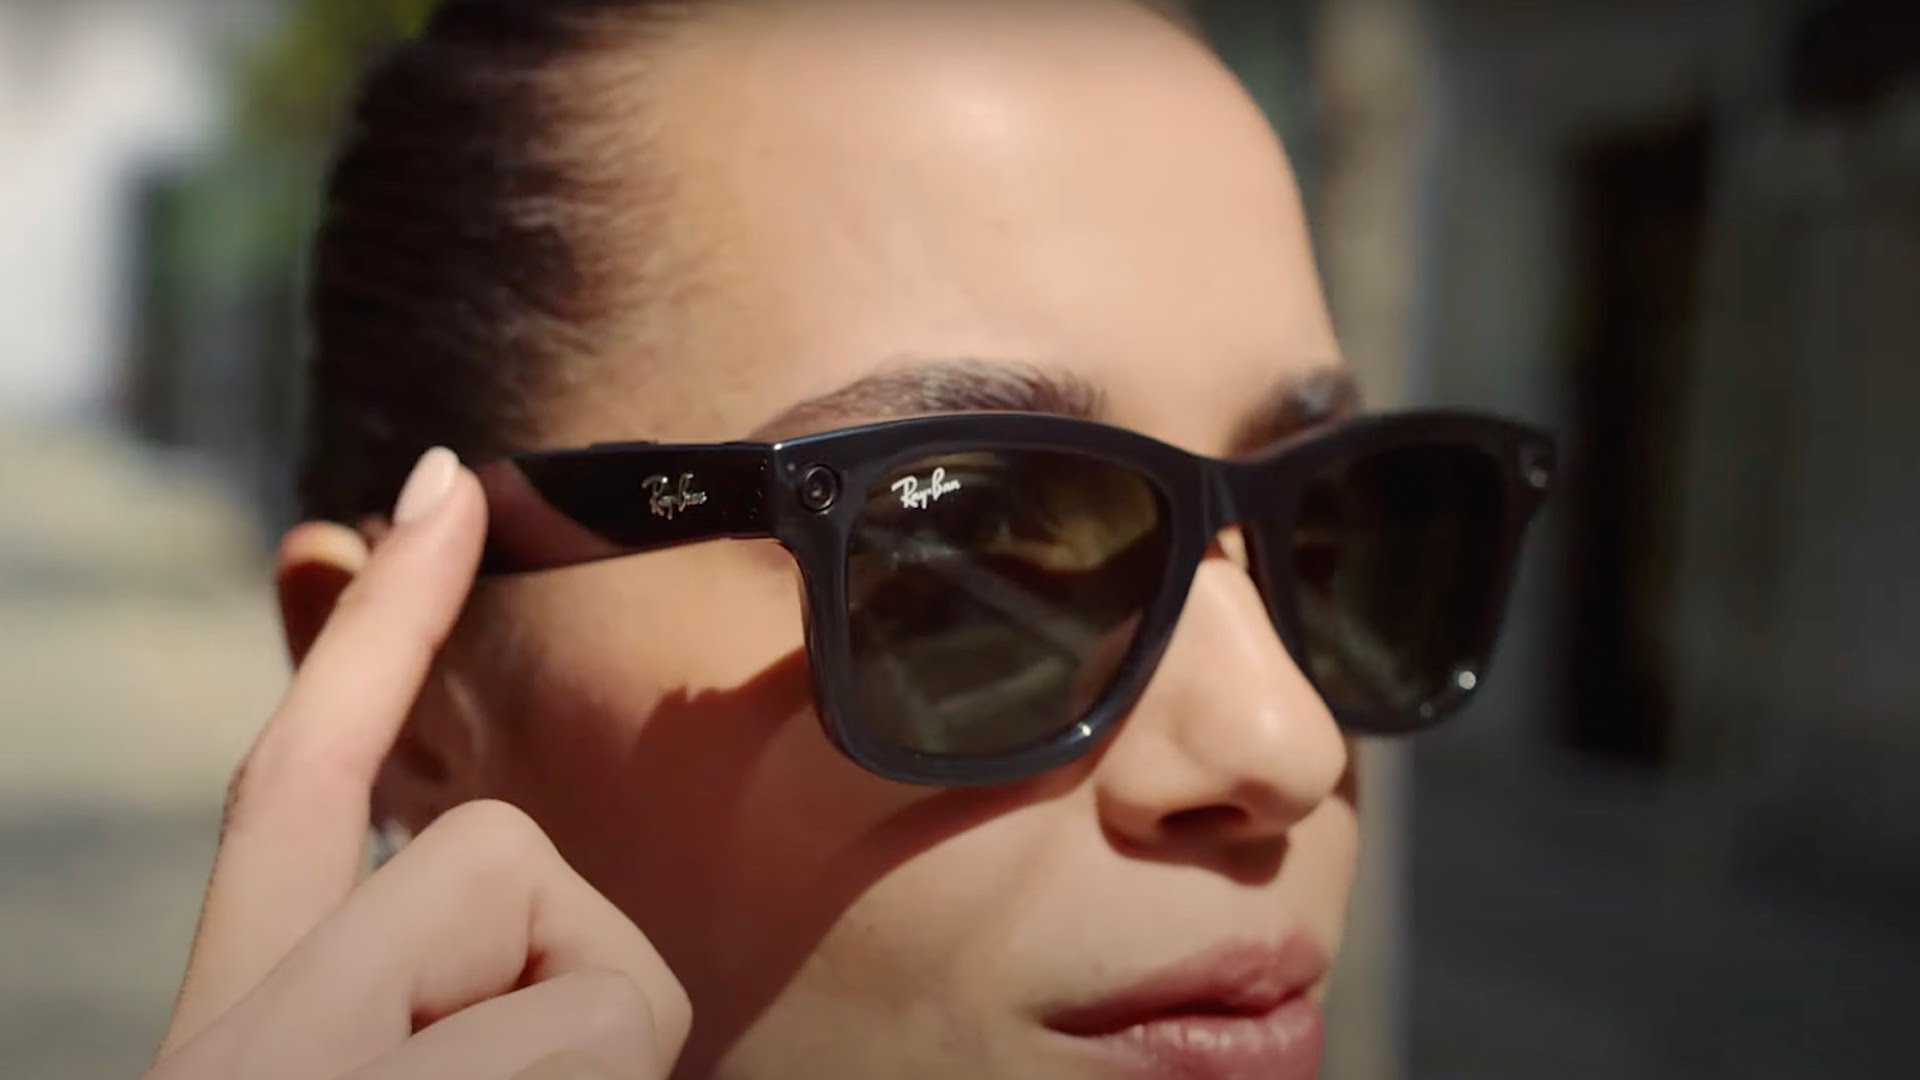 Ved navn Få Ripples Packed with technology: How Meta's Ray-Ban smart glasses were created